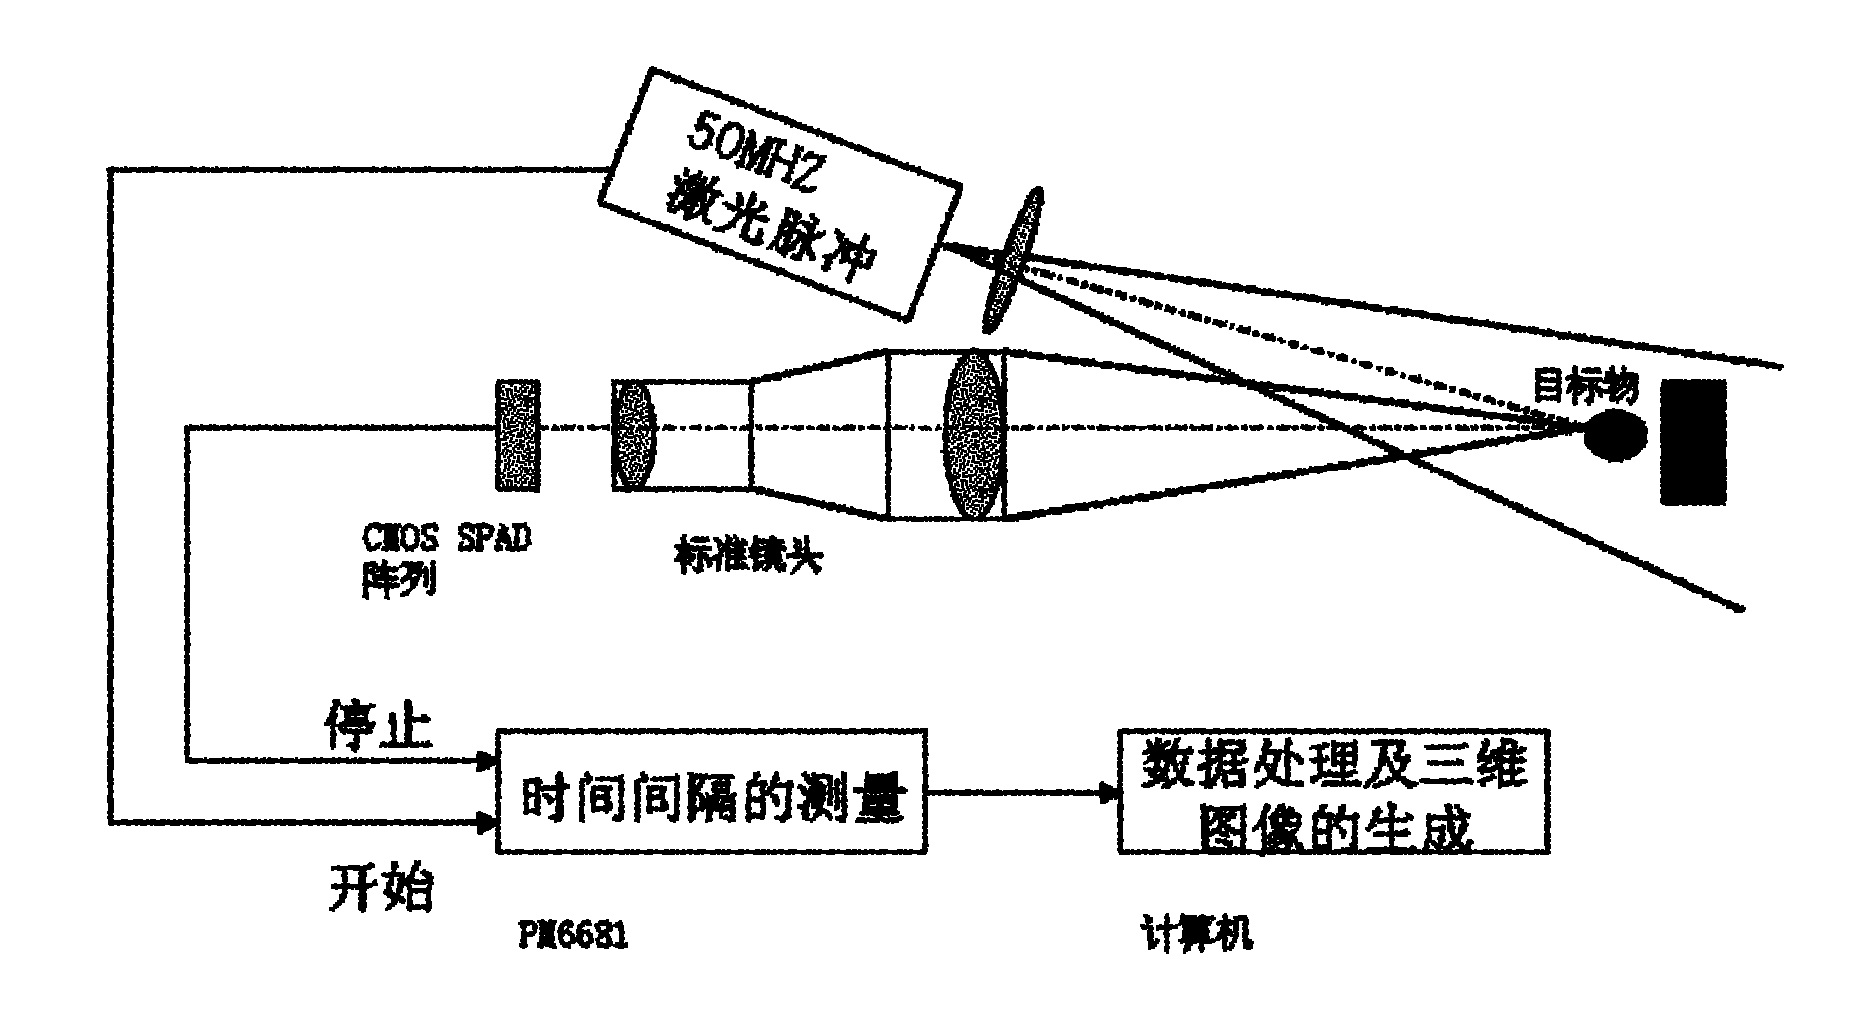 Single-photon avalanche diode and three-dimensional CMOS (Complementary Metal Oxide Semiconductor) image sensor based on same